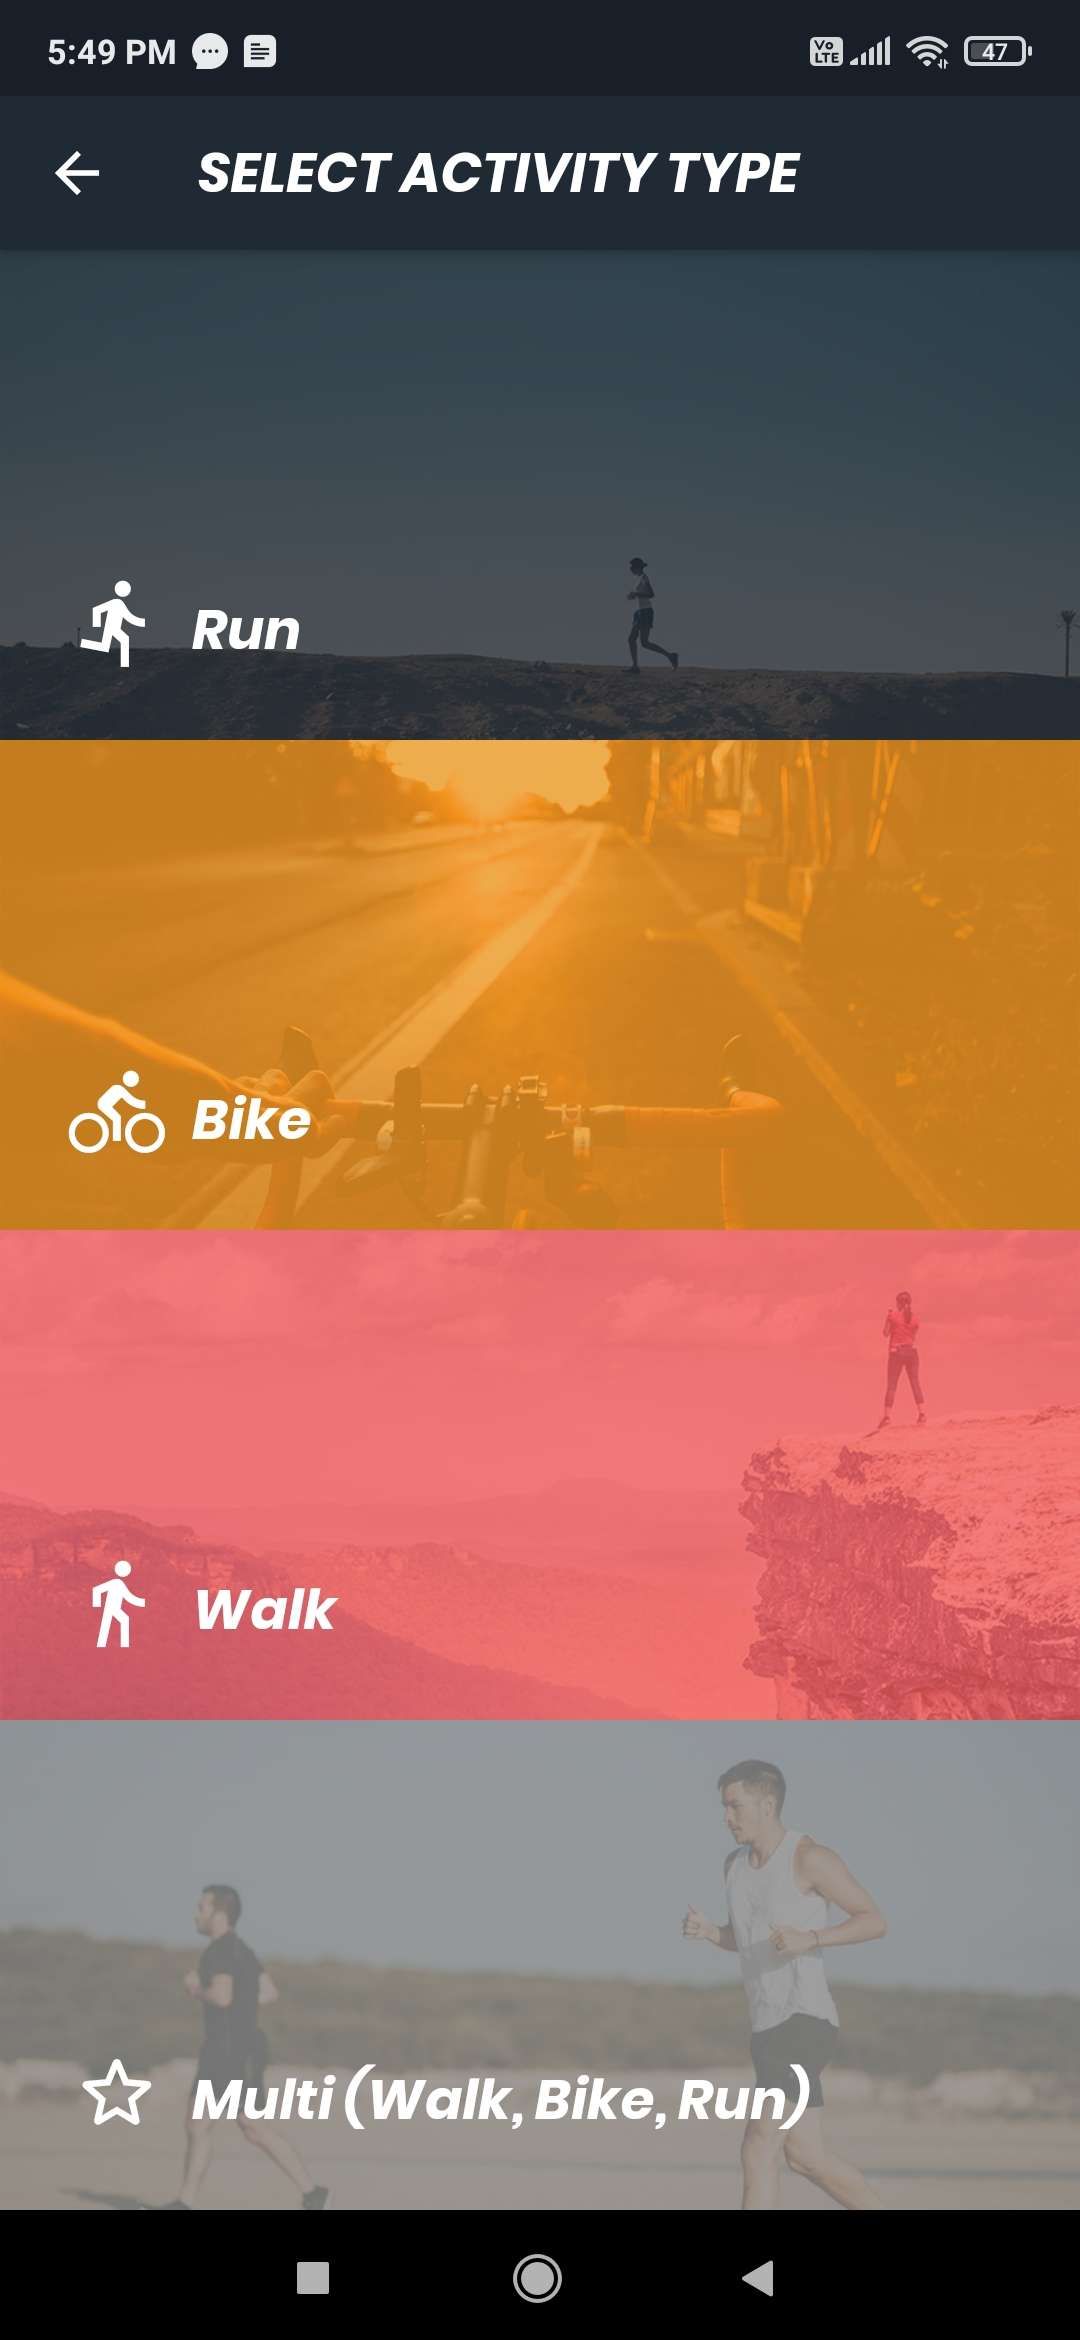 Myles offers different exercises for biking, running, and walking